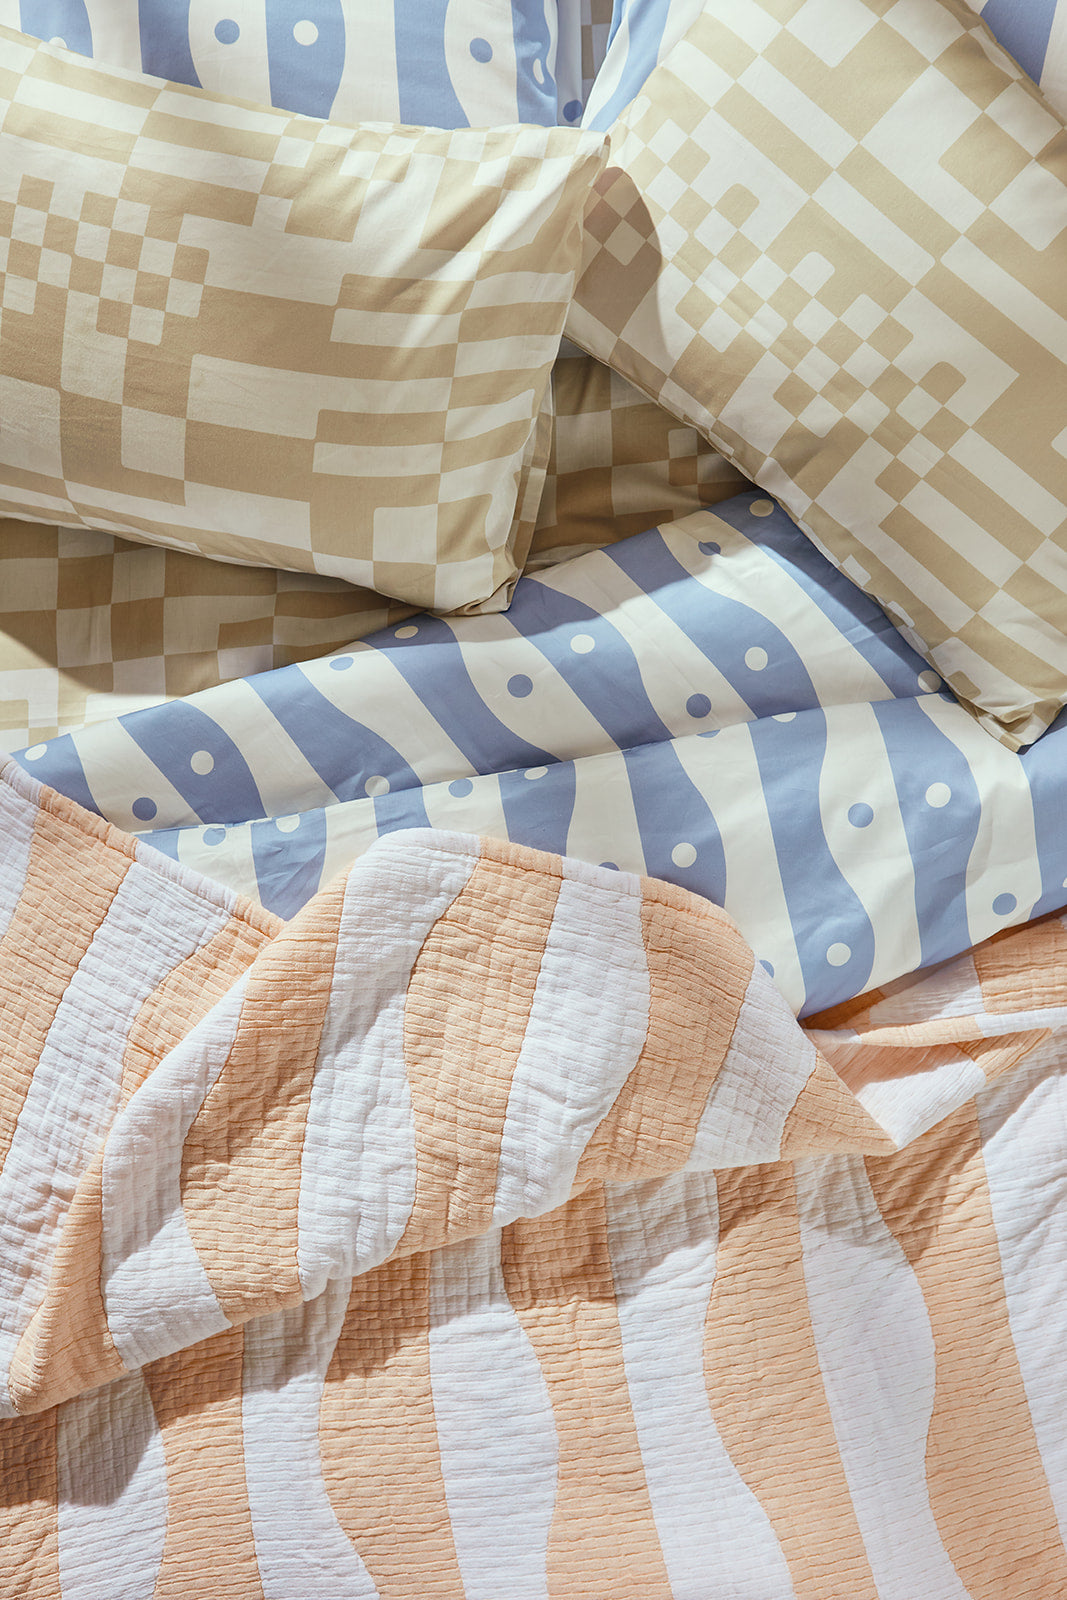 Dusen Dusen Check Duvet and Sheet Sets in beige and white Check print. Include an individual Flat Sheet to round out a Sheet Set. 100% cotton sateen, 300 thread count. Machine wash cold and tumble dry. Made in Portugal. Our cotton sateen is smooth and cool to the touch, and features a slight lustrous finish. The sateen softens further with every wash;